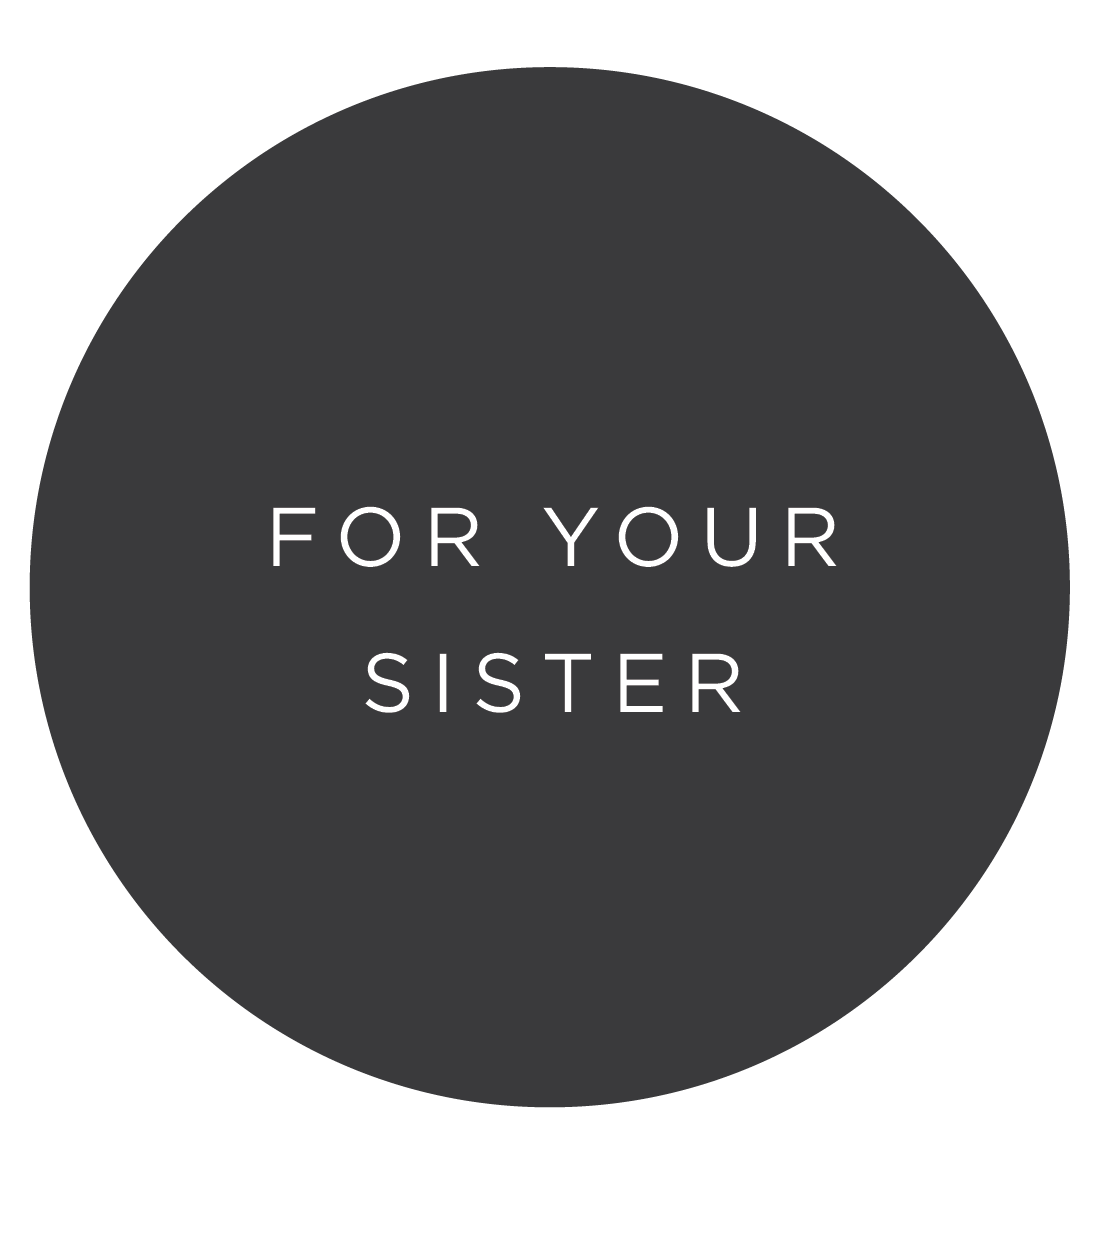 FOR YOUR SISTER